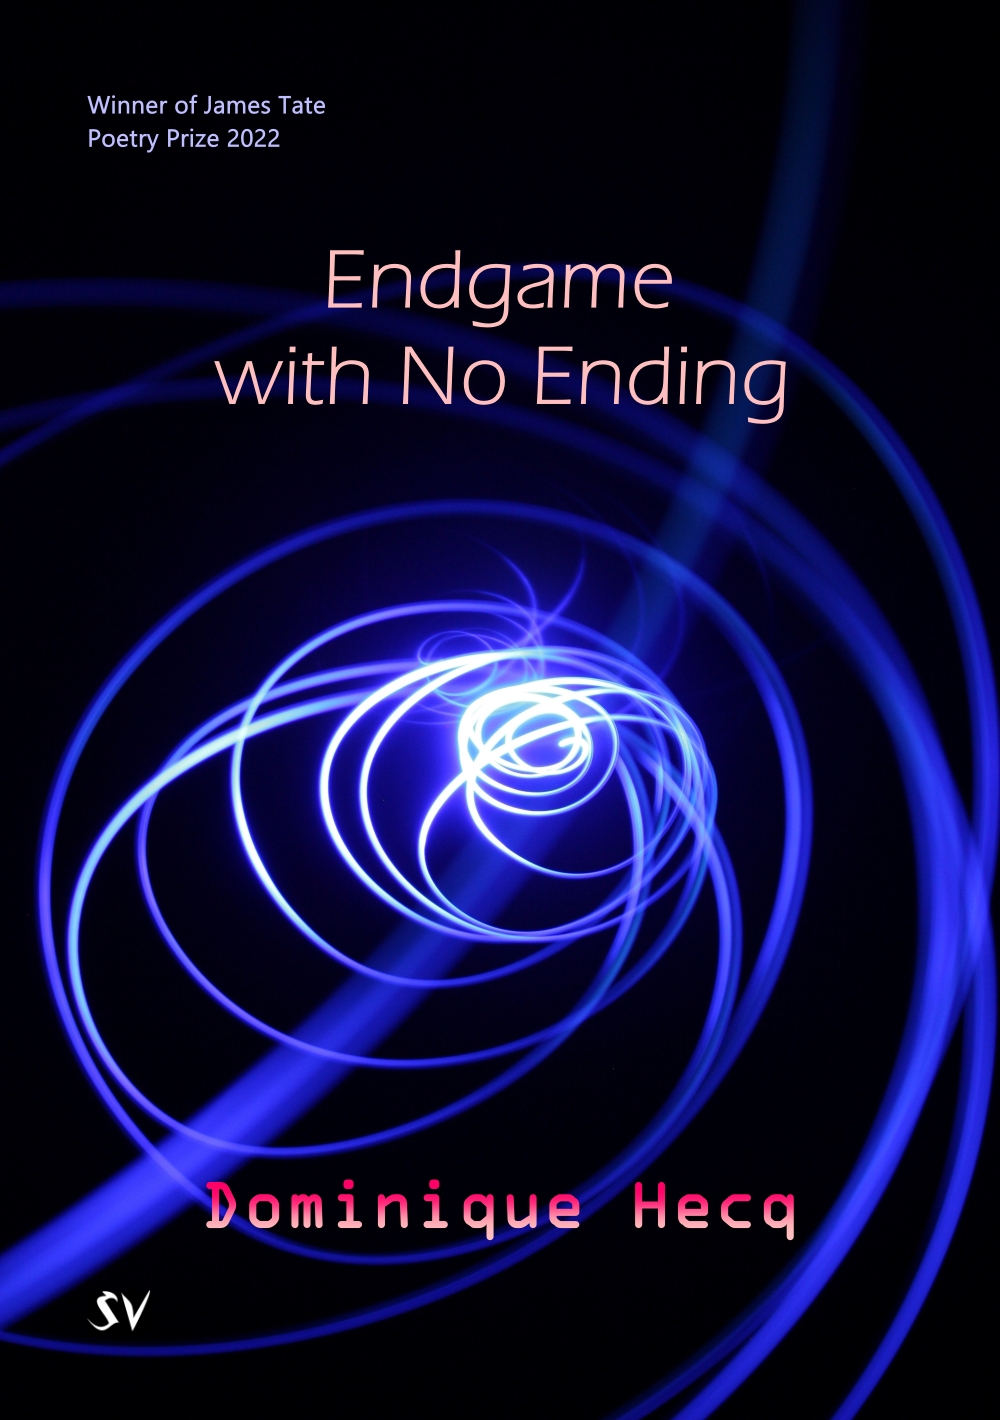 Endgame with No Ending